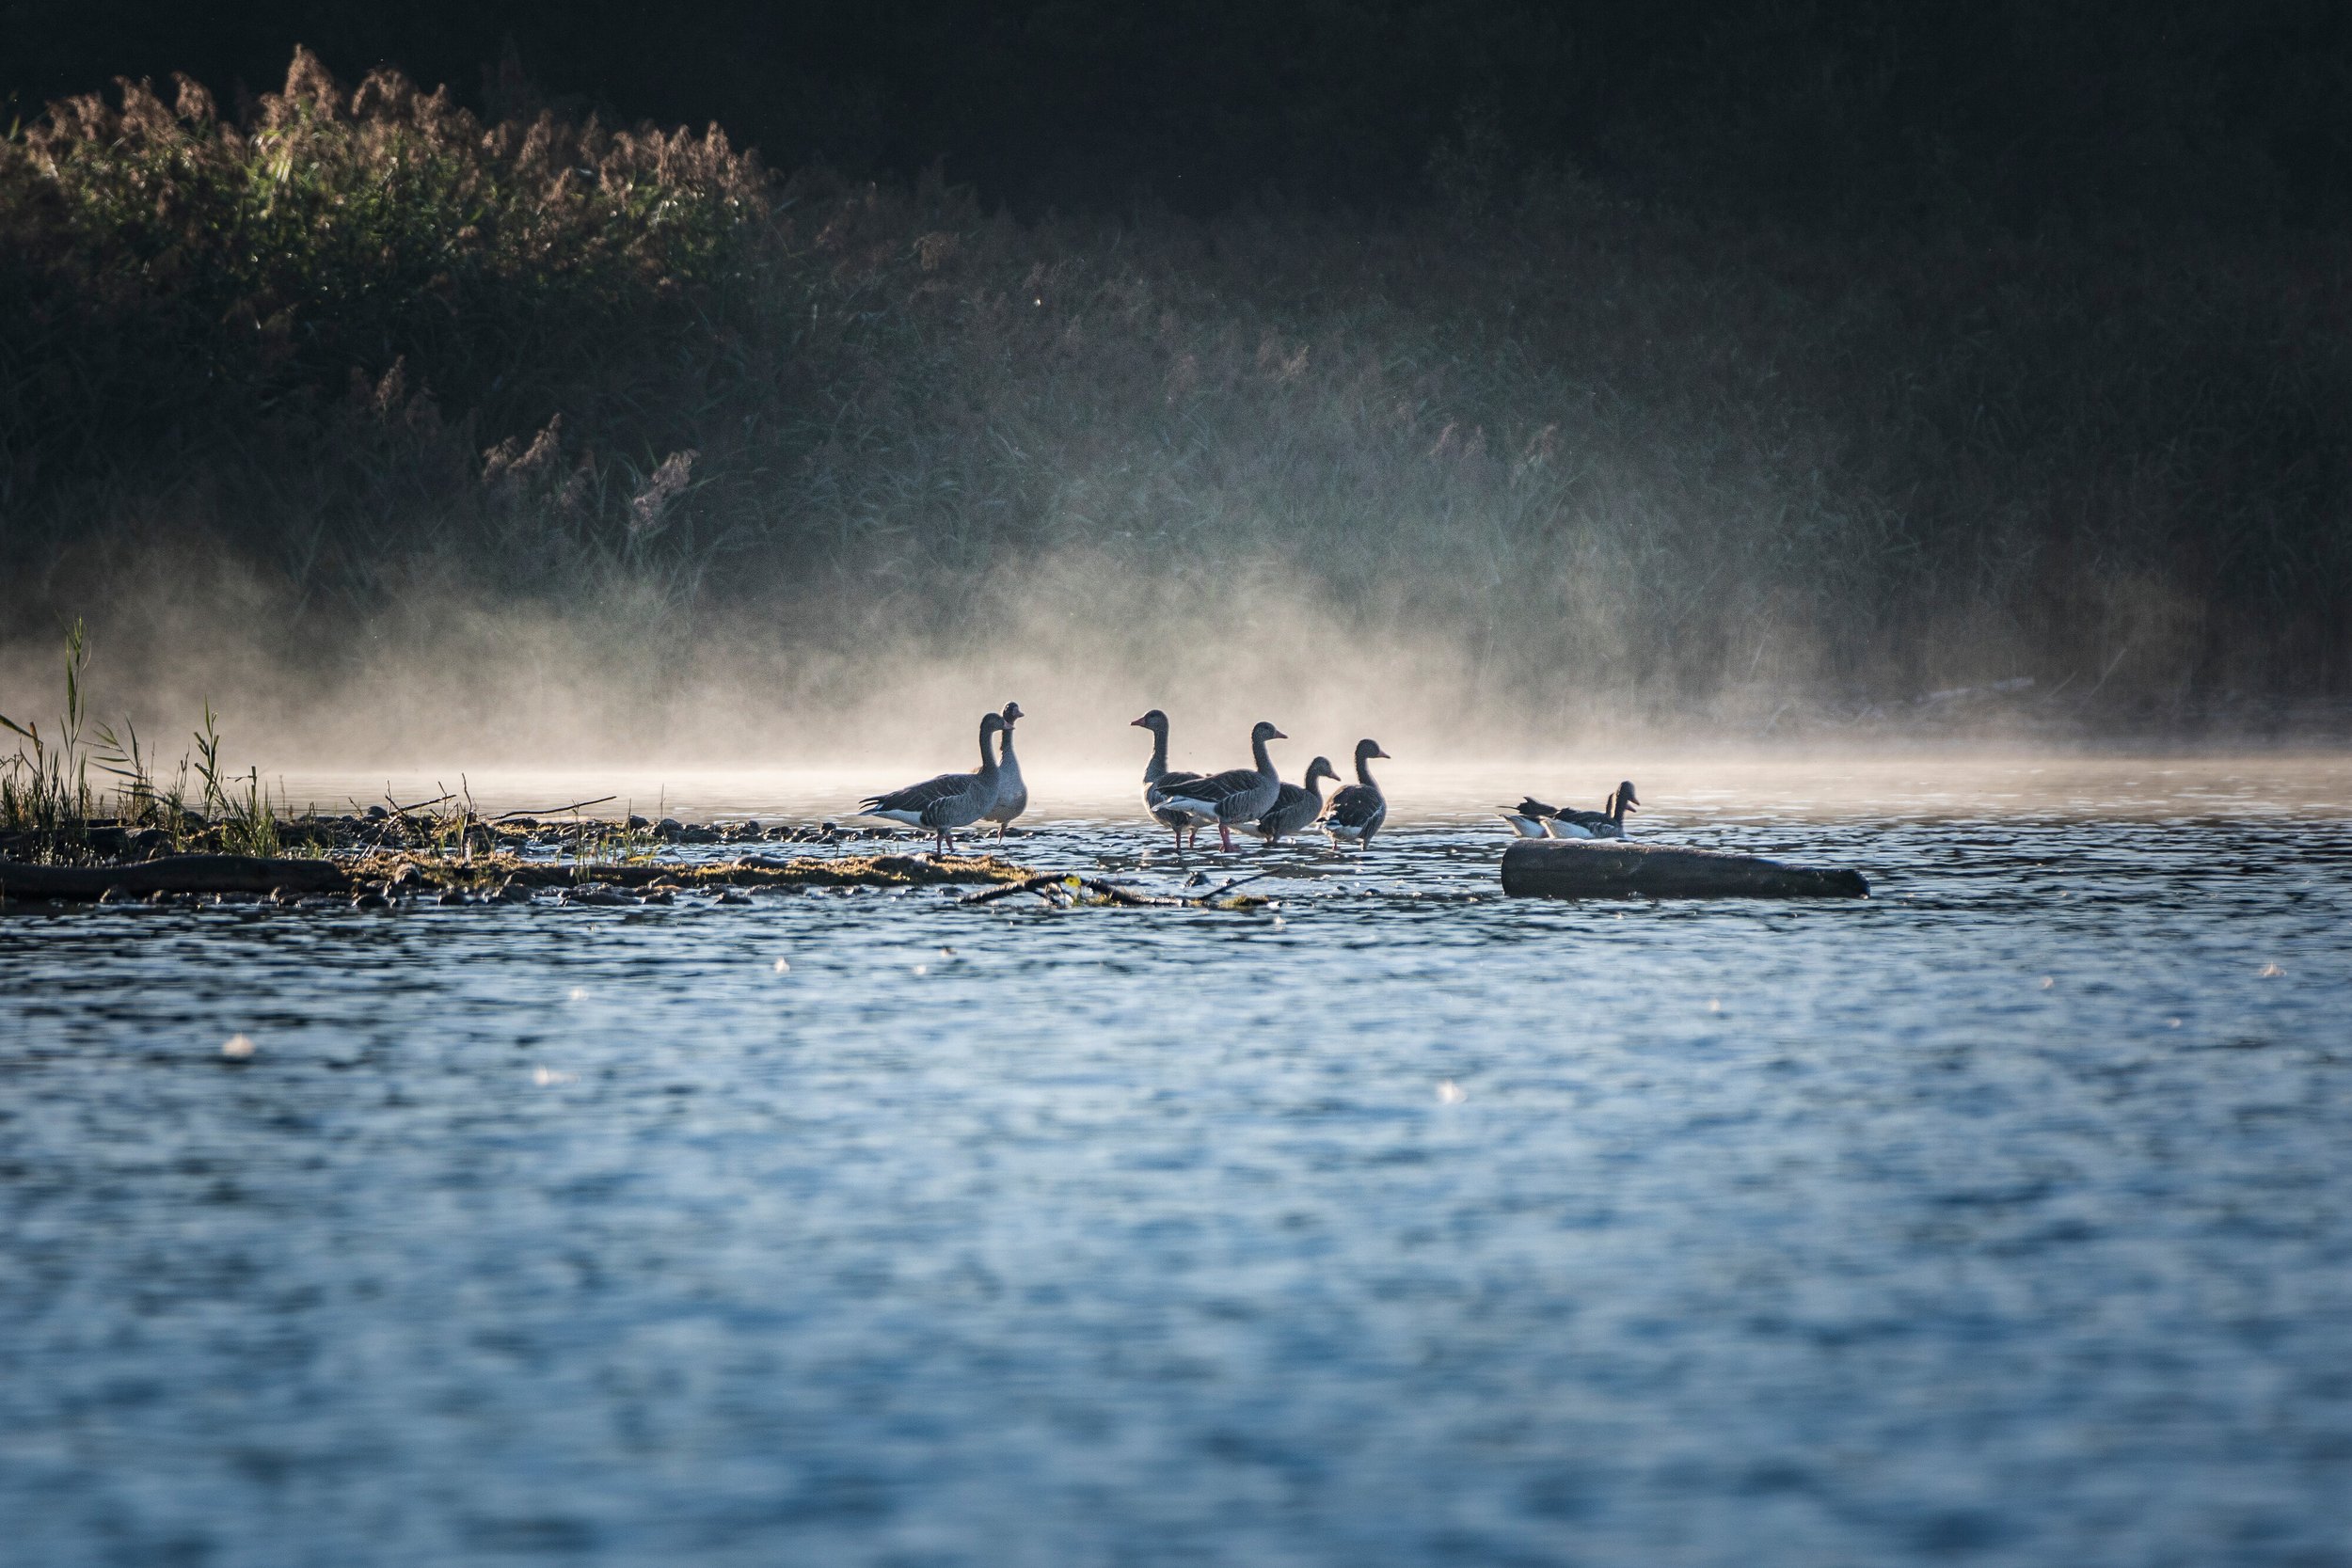 Geese at the Chiemsee in the morning haze